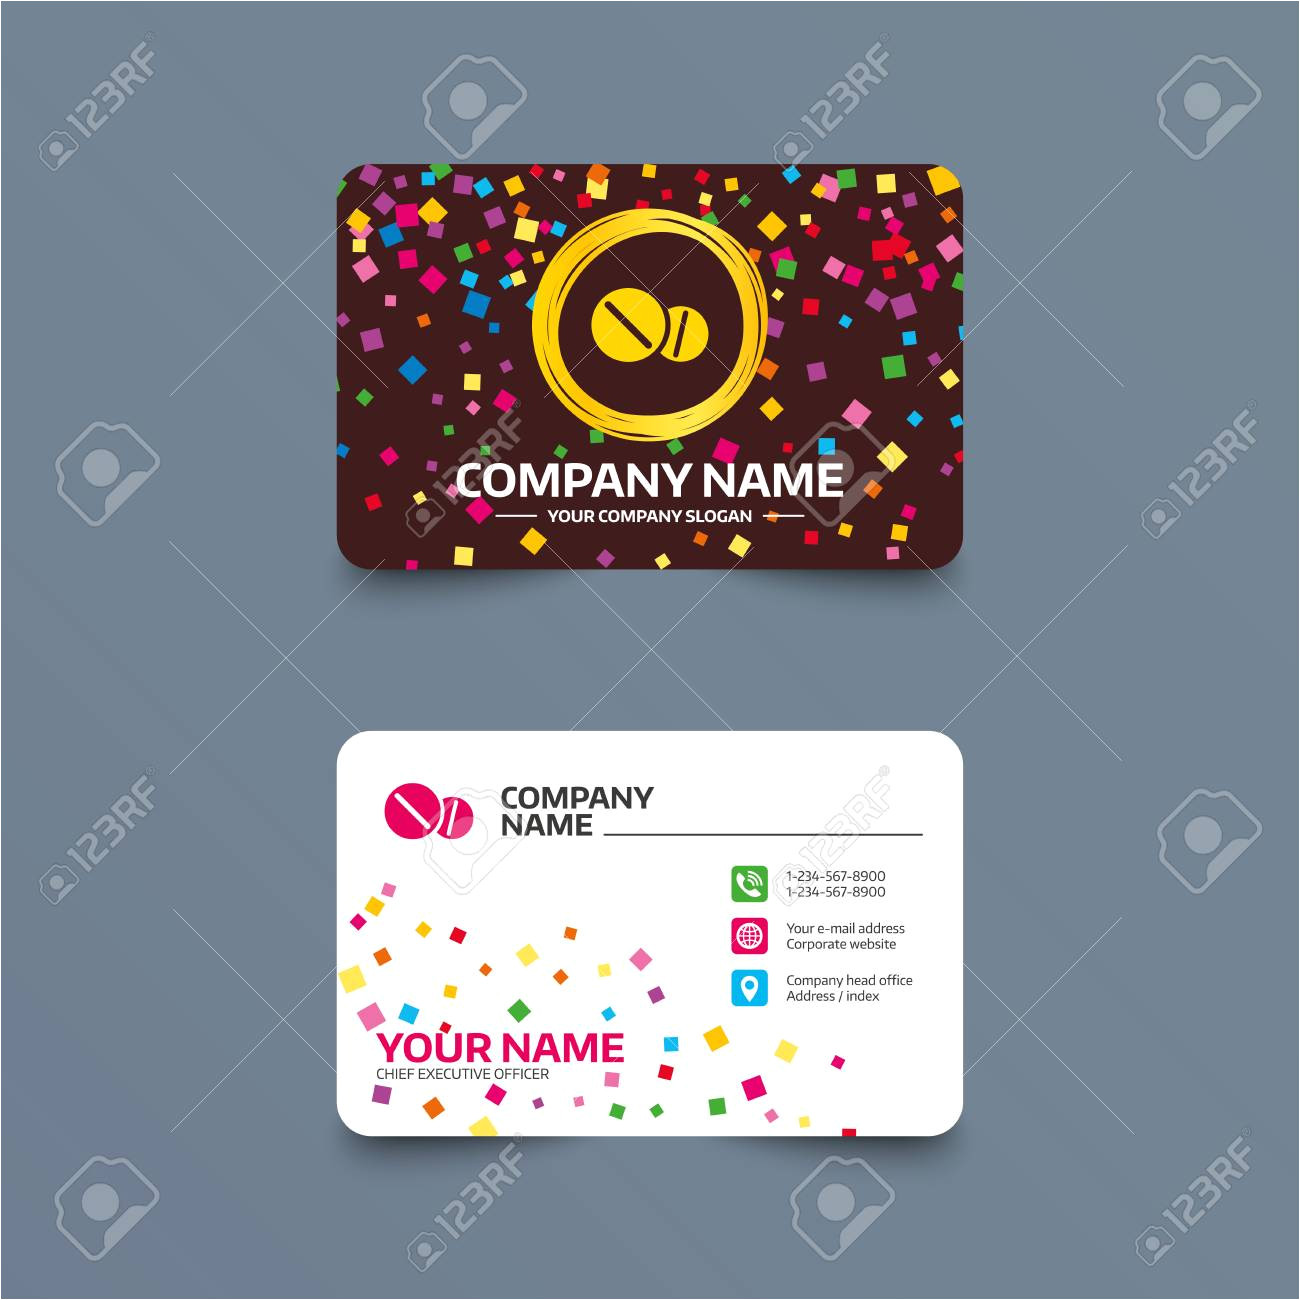 70145431 business card template with confetti pieces medical tablets sign icon pharmacy medicine drugs symbol jpg